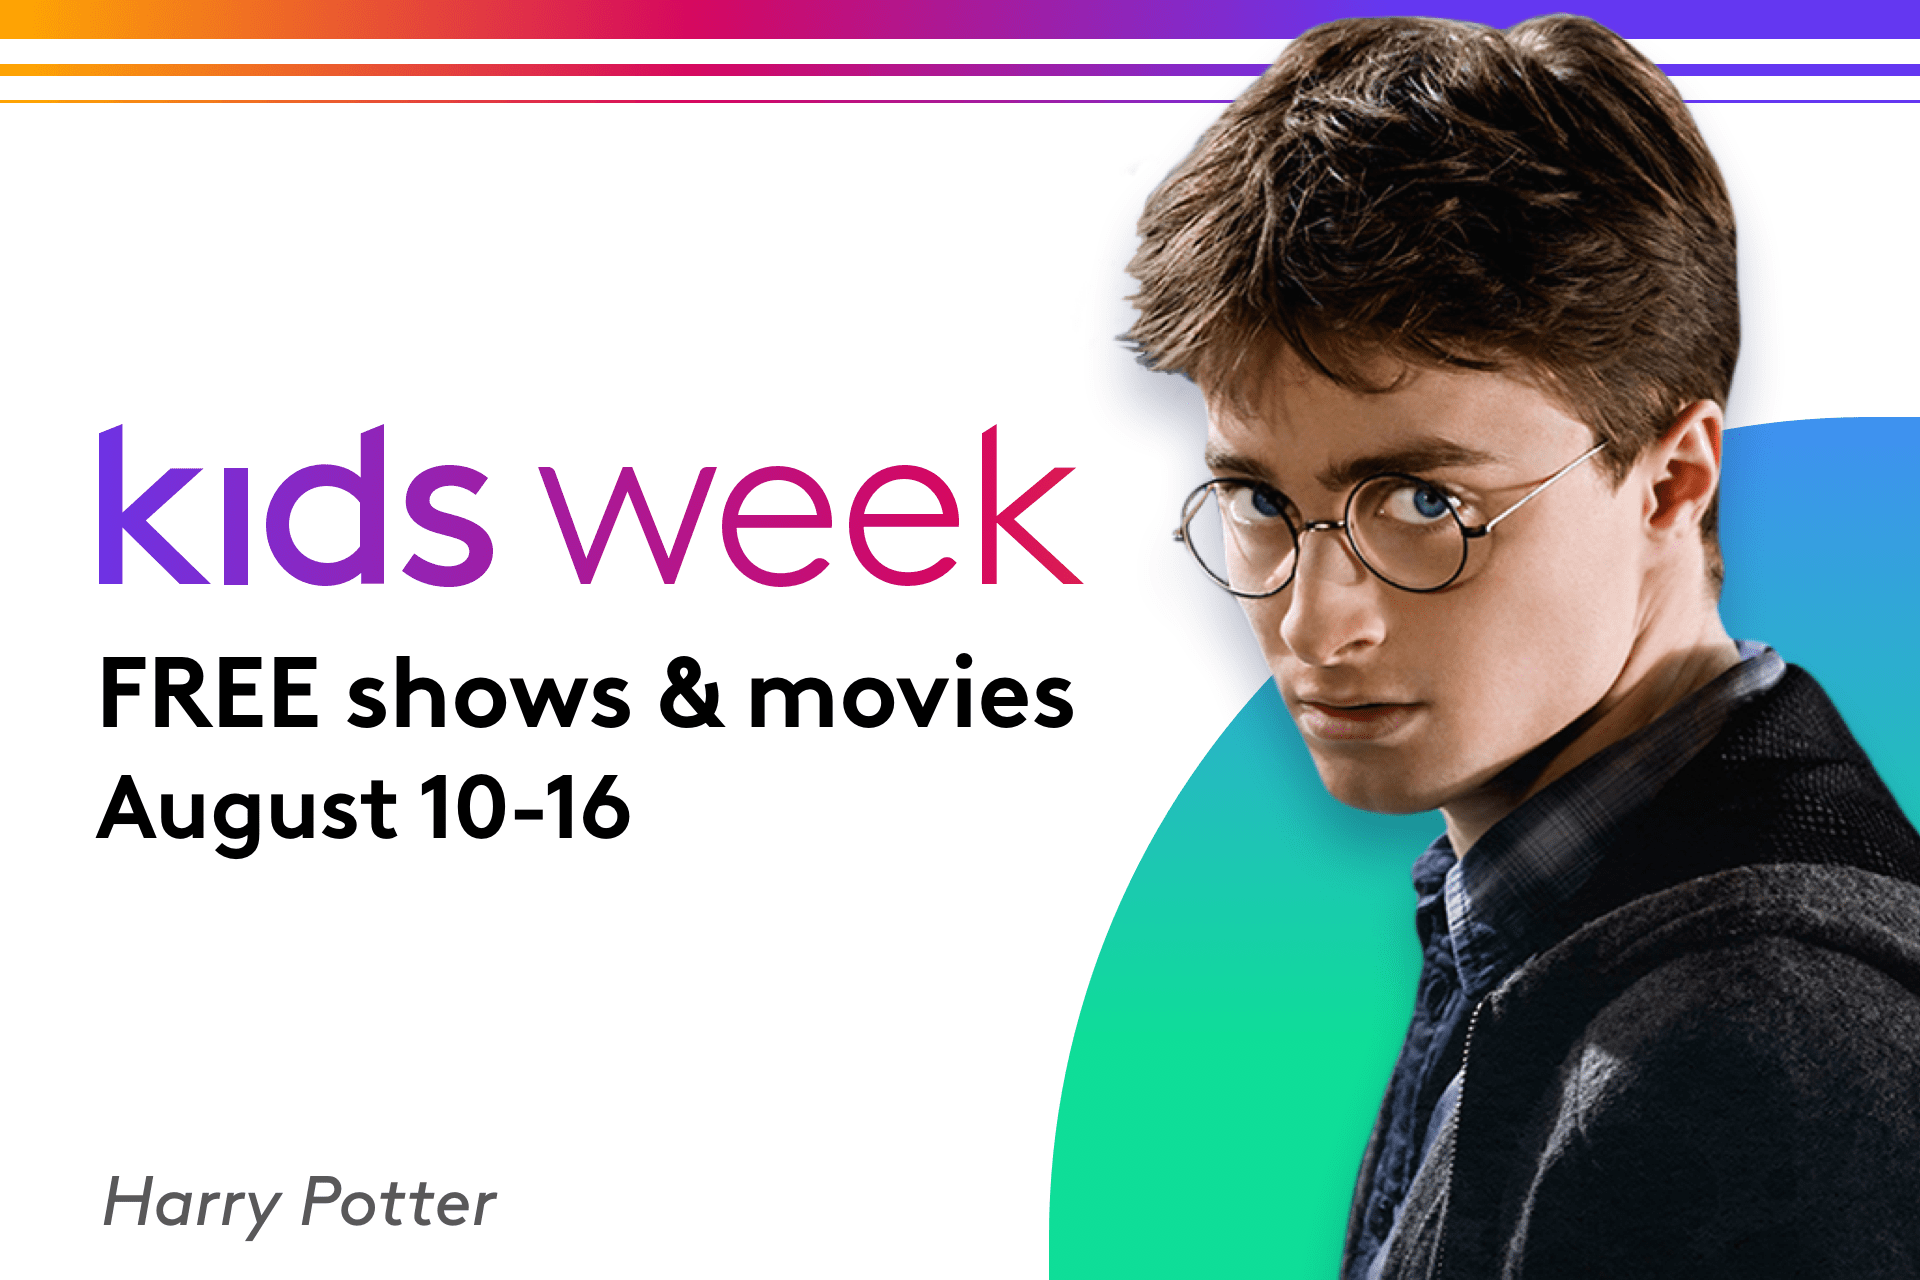 Watch ‘Harry Potter’, ‘Spin!’ and More on Xfinity During Kids Week!